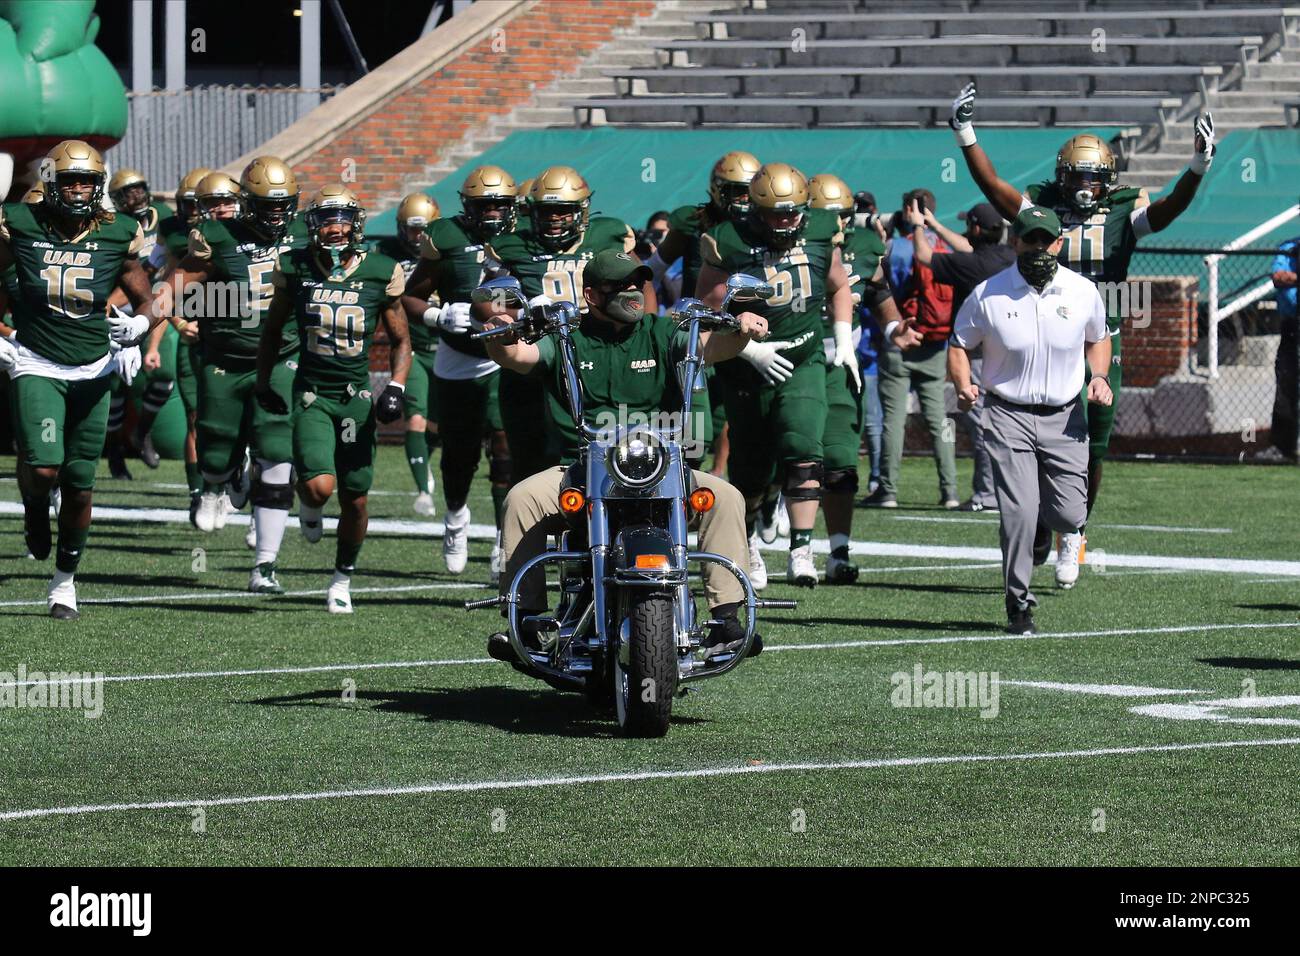 BIRMINGHAM, AL - OCTOBER 17: The UAB Blazers run out onto the field for the  game between UAB Blazers and Western Kentucky Hilltoppers on October 17,  2020 at Legion Field in Birmingham